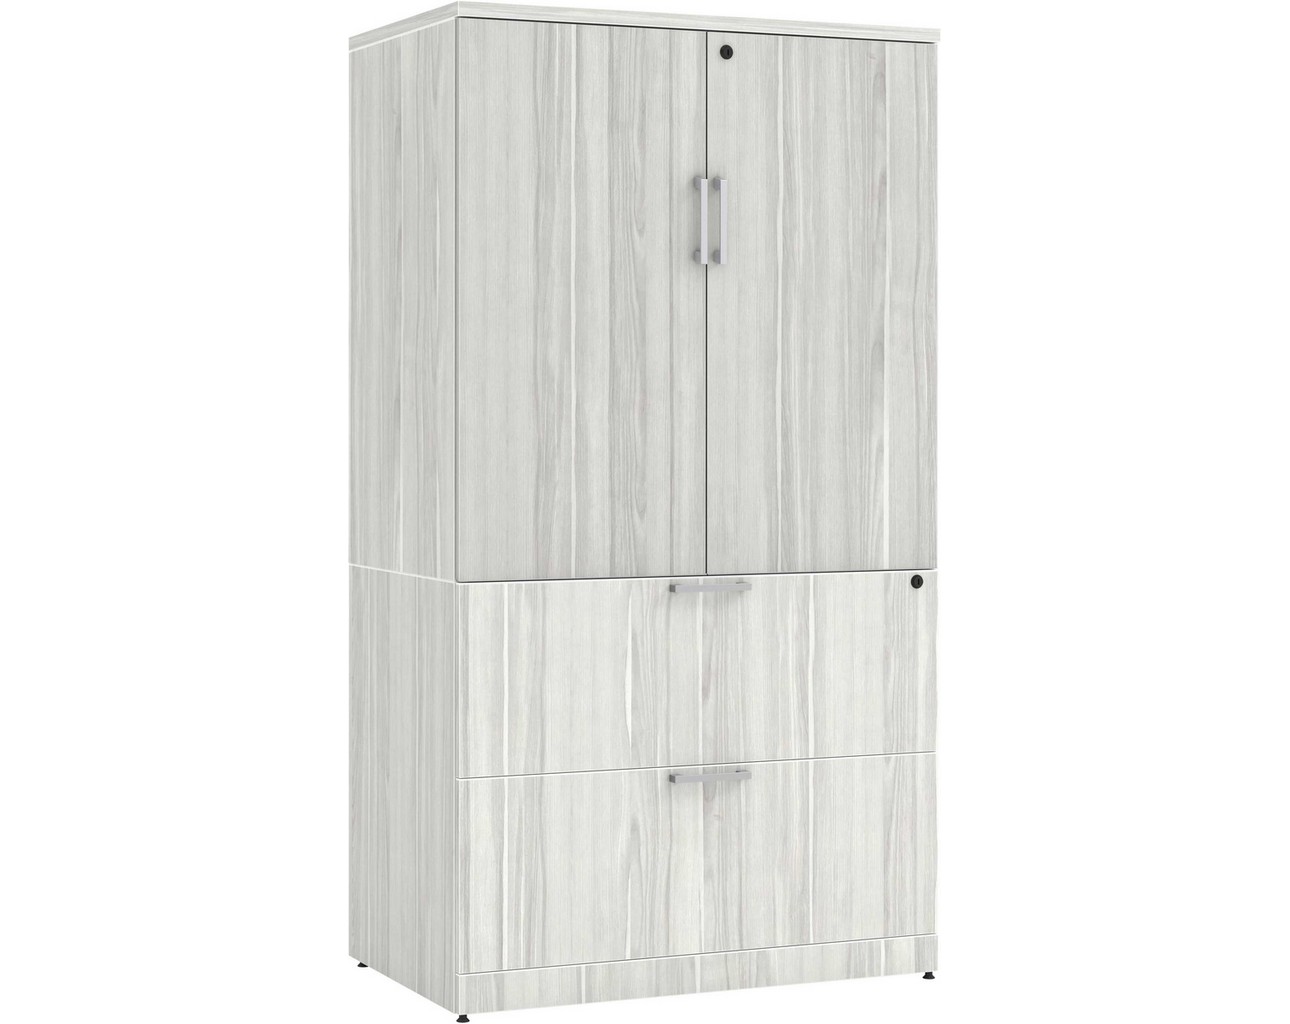 Locking Storage Cabinet and Lateral File Combo Unit – Silver Birch